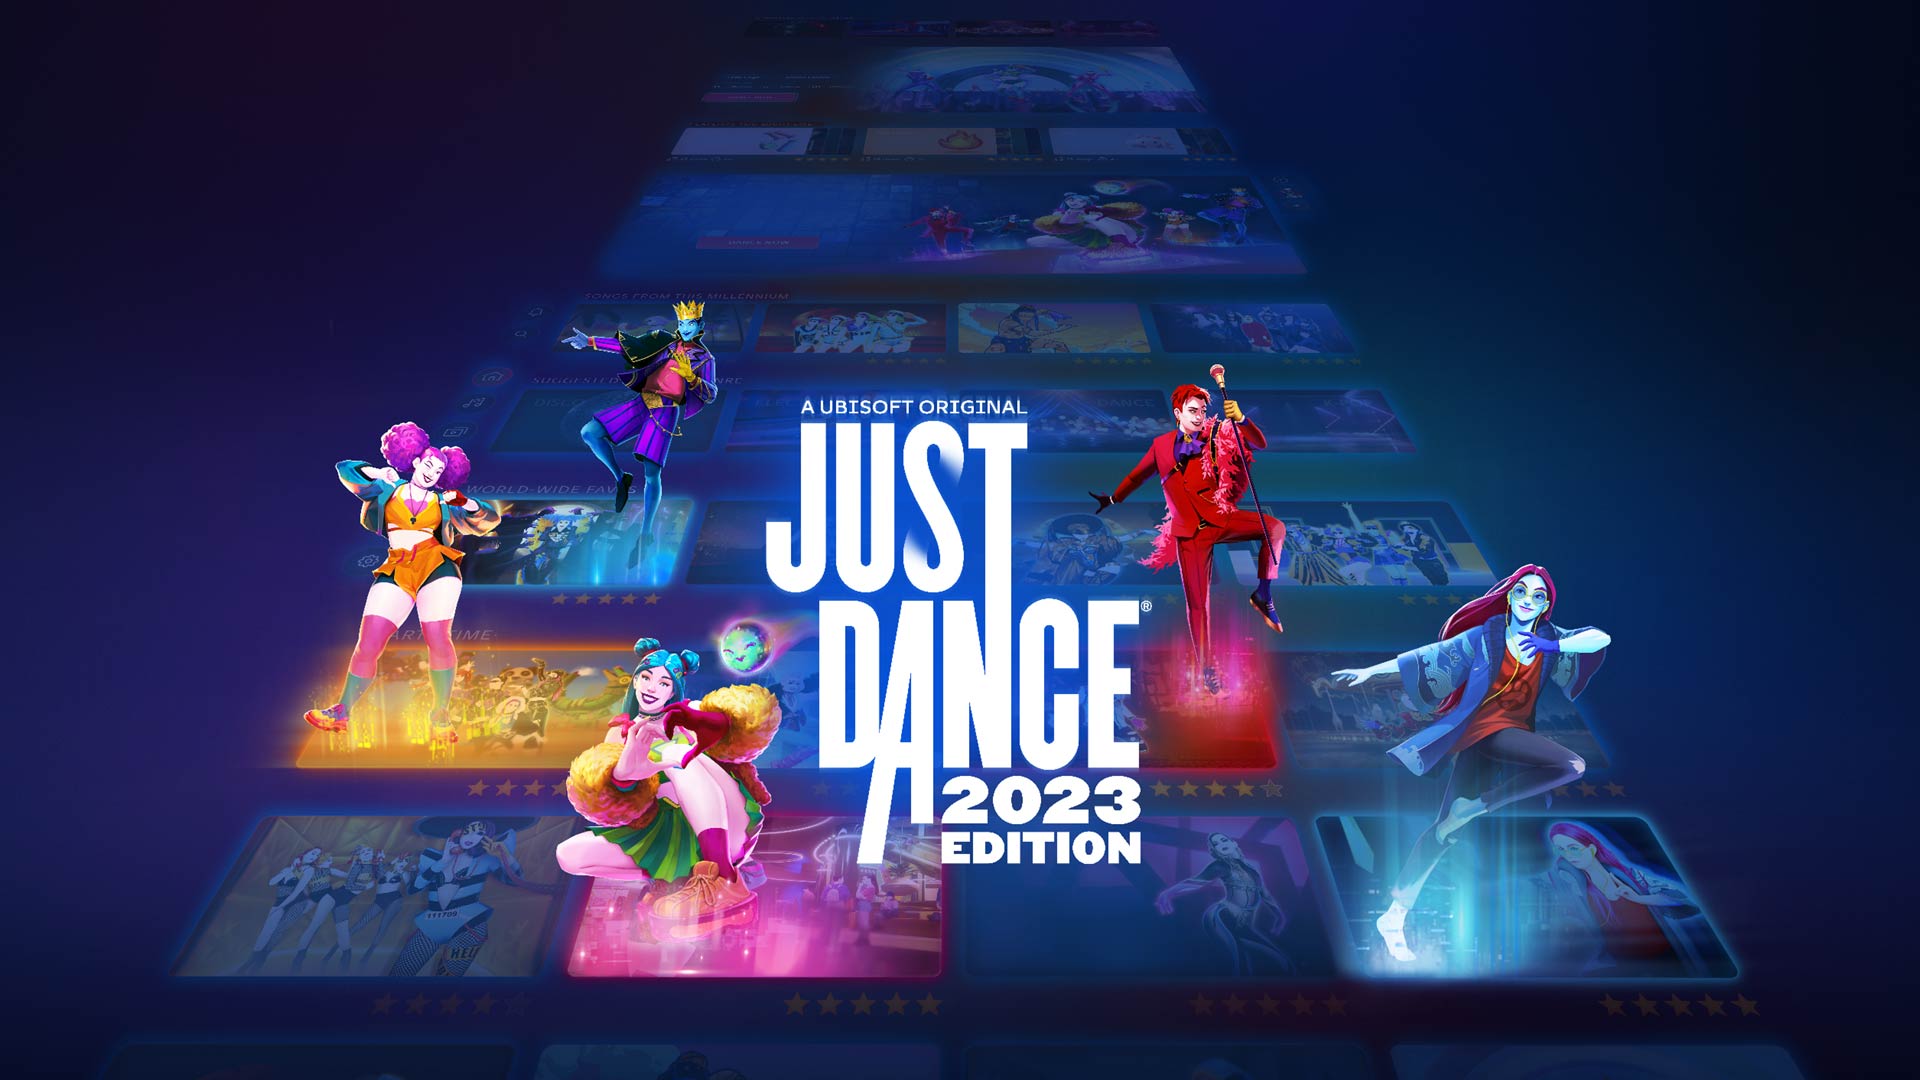 Just Dance 2023 Edition song list revealed